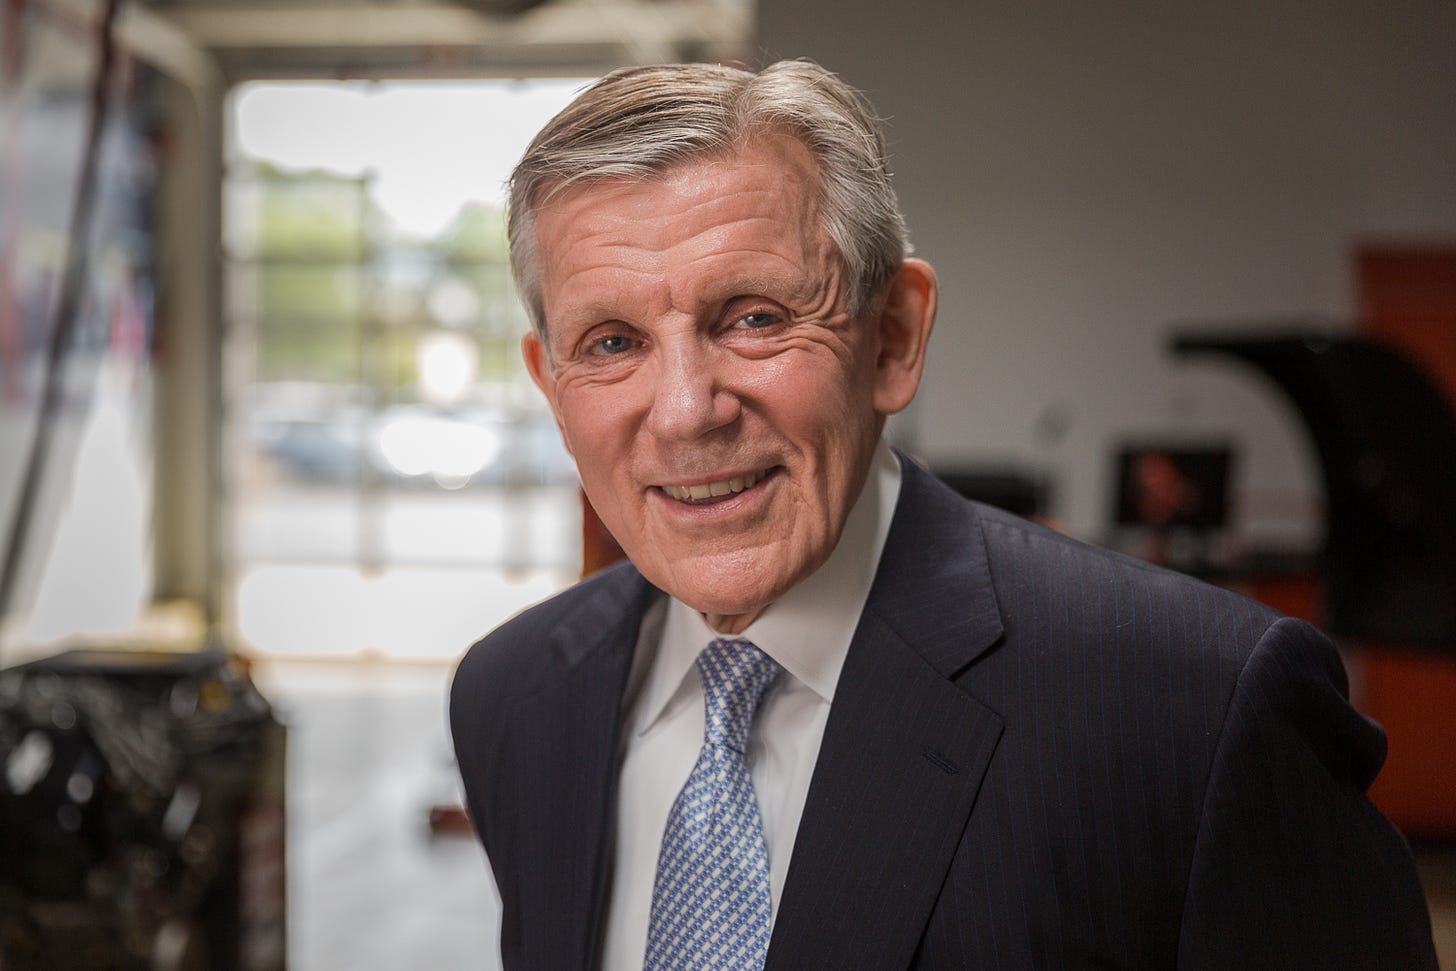 Snap-on CEO Nick Pinchuk on reviving career and technical education |  WorkingNation